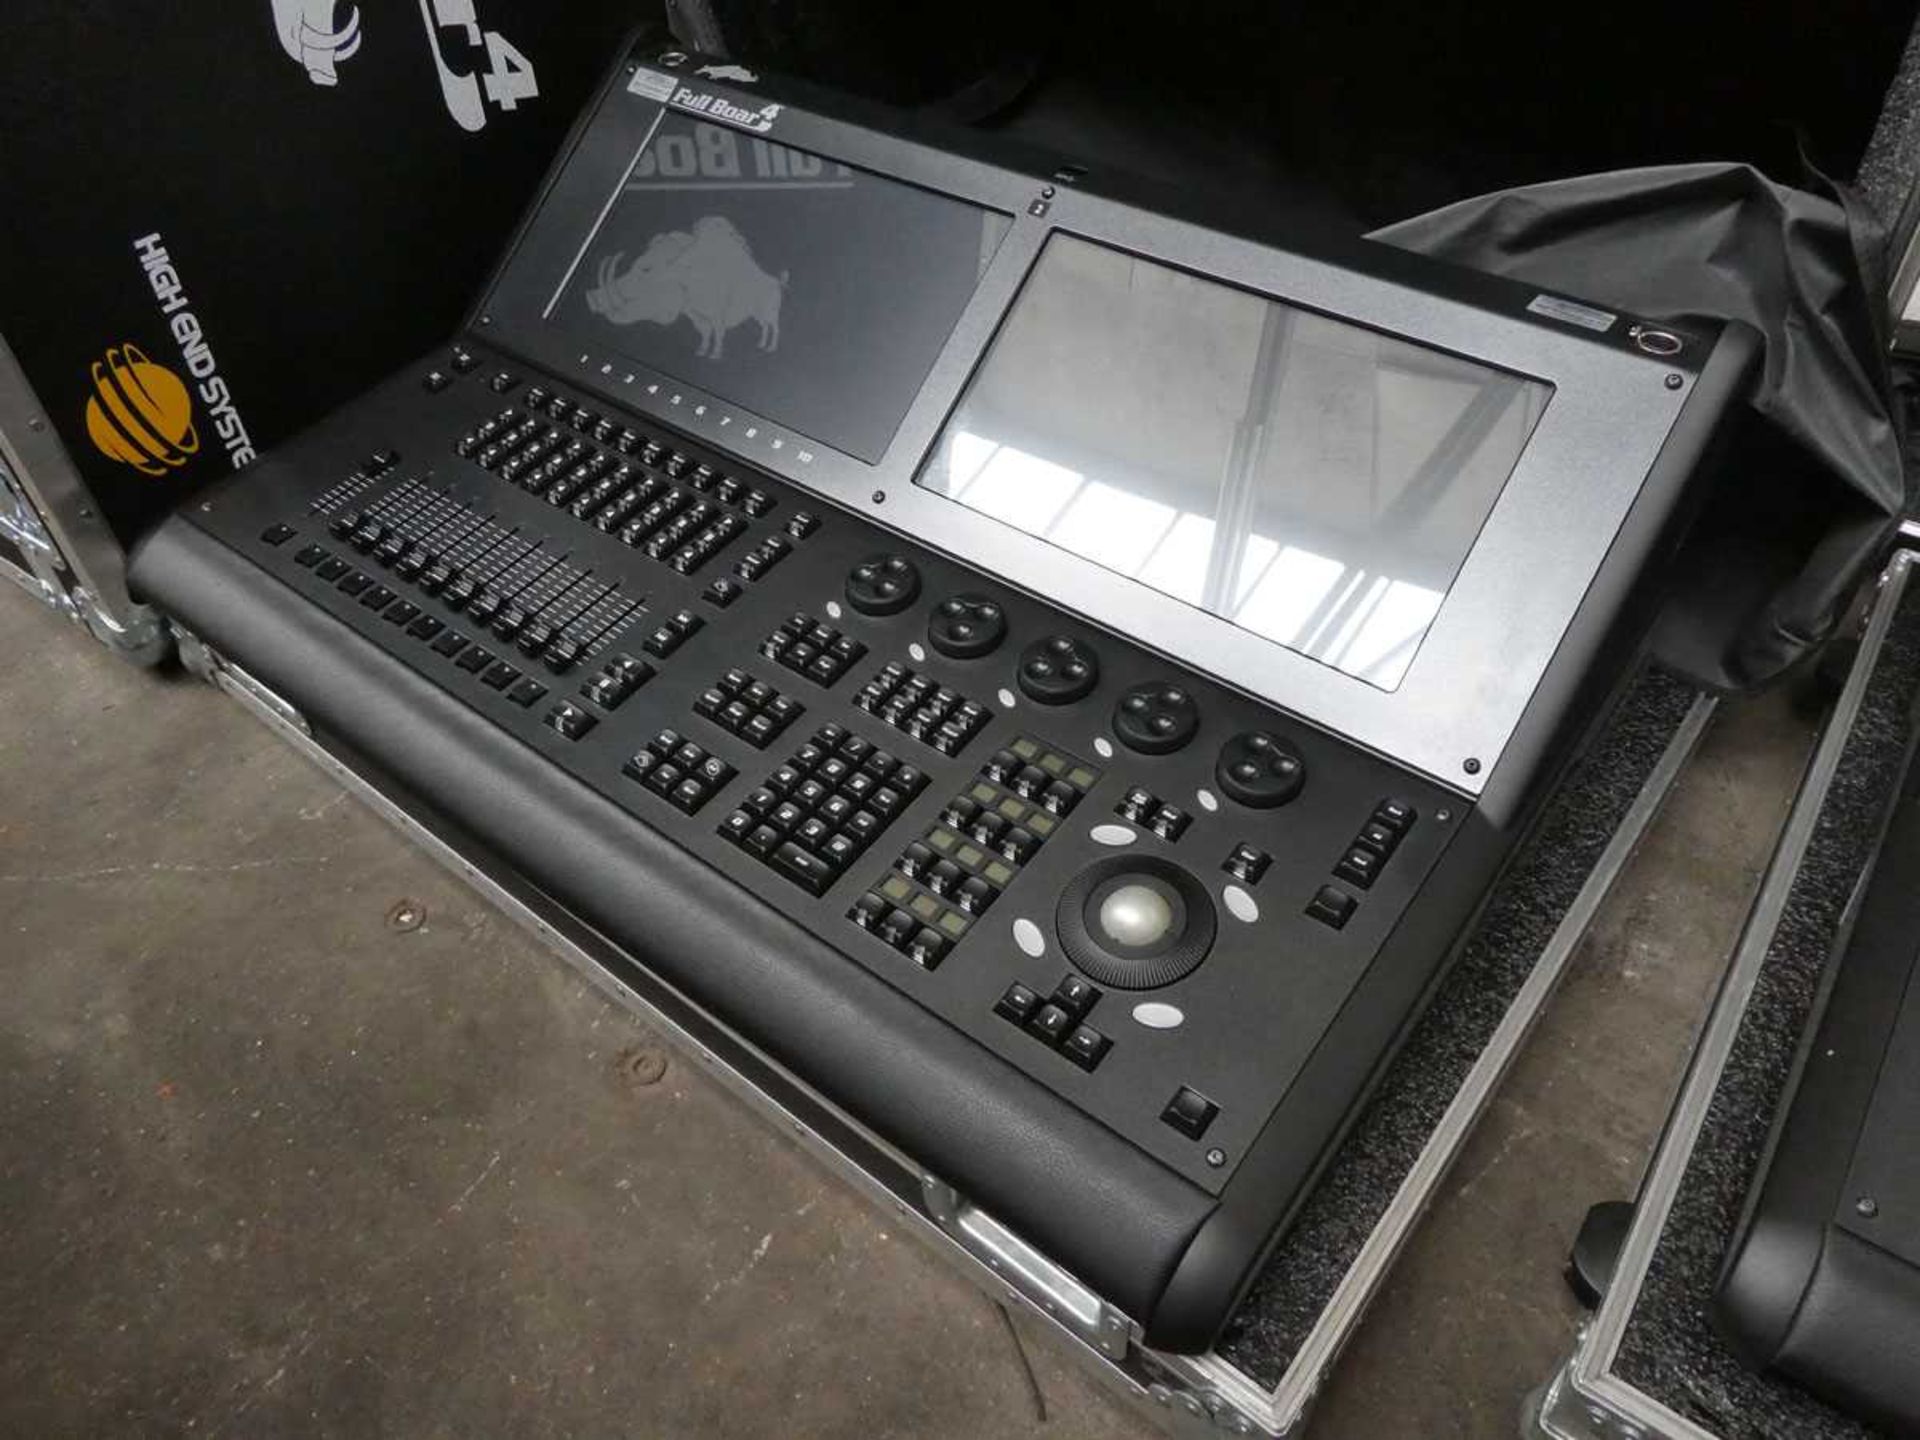 +VAT Hog Full Boar 4 DMX lighting console by High End Systems with 4x DMX outputs on rear panel,